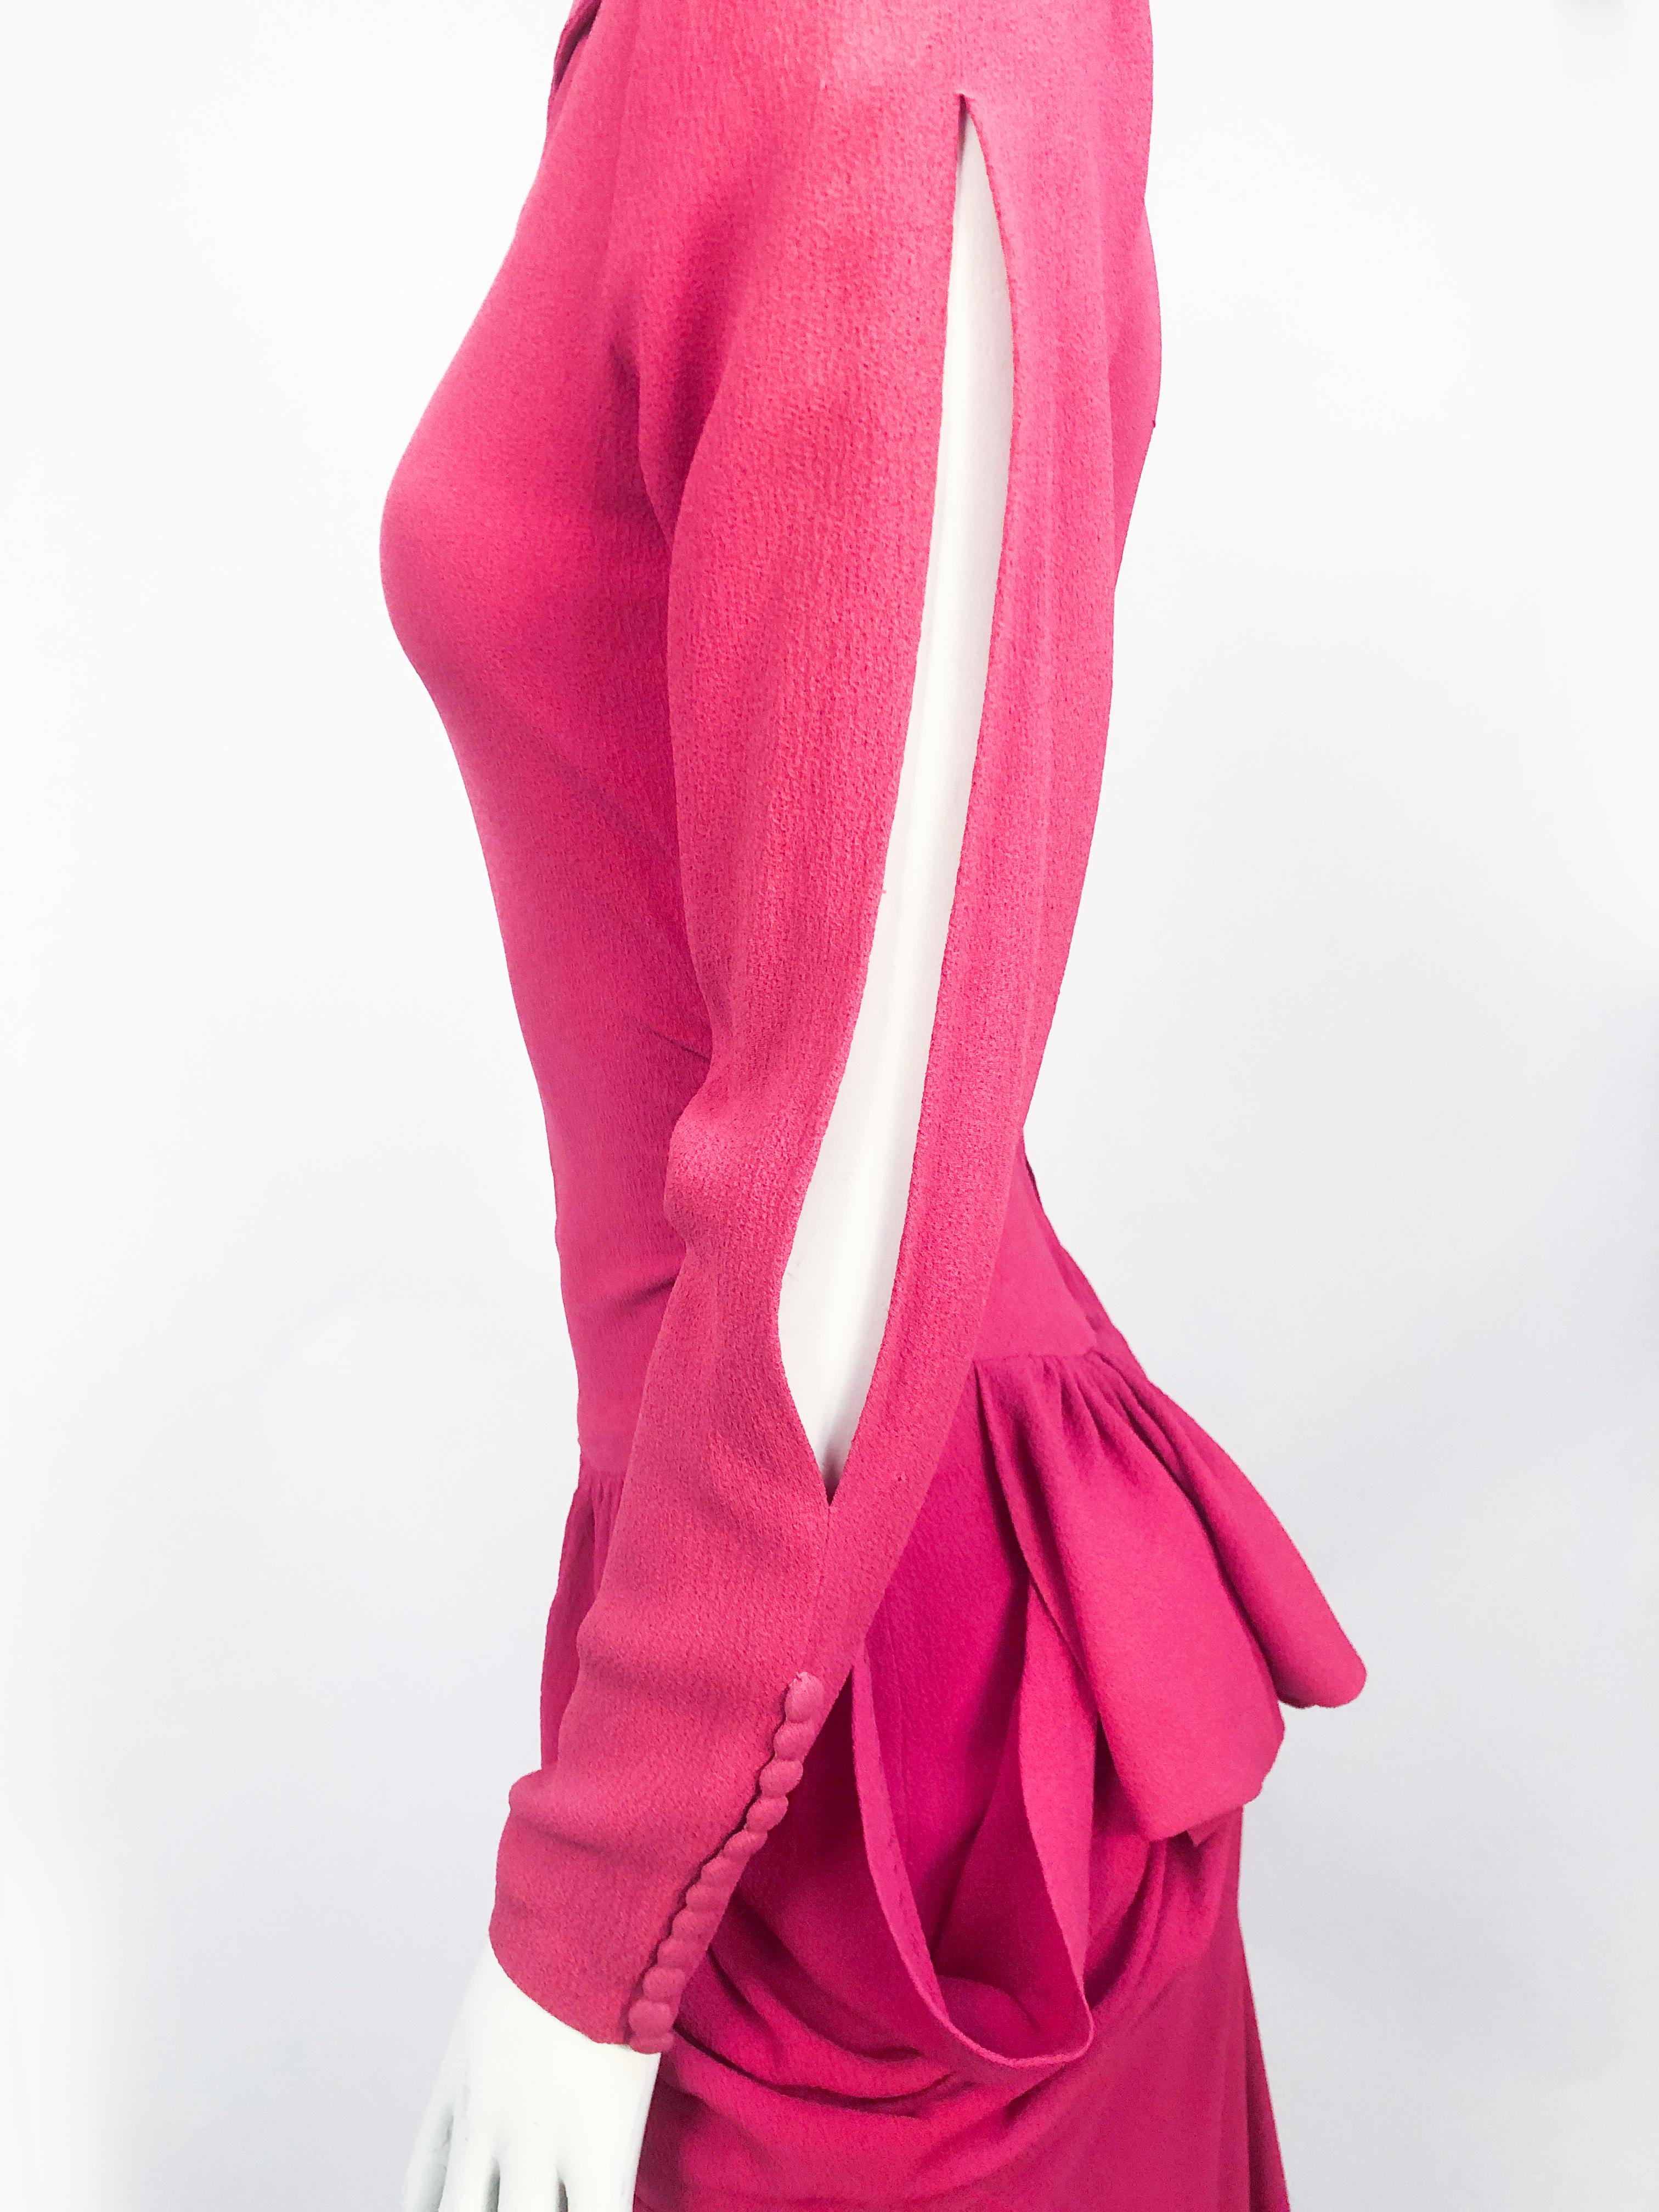 1940s Hot Pink Dress with Flounces and Draped Panels  1